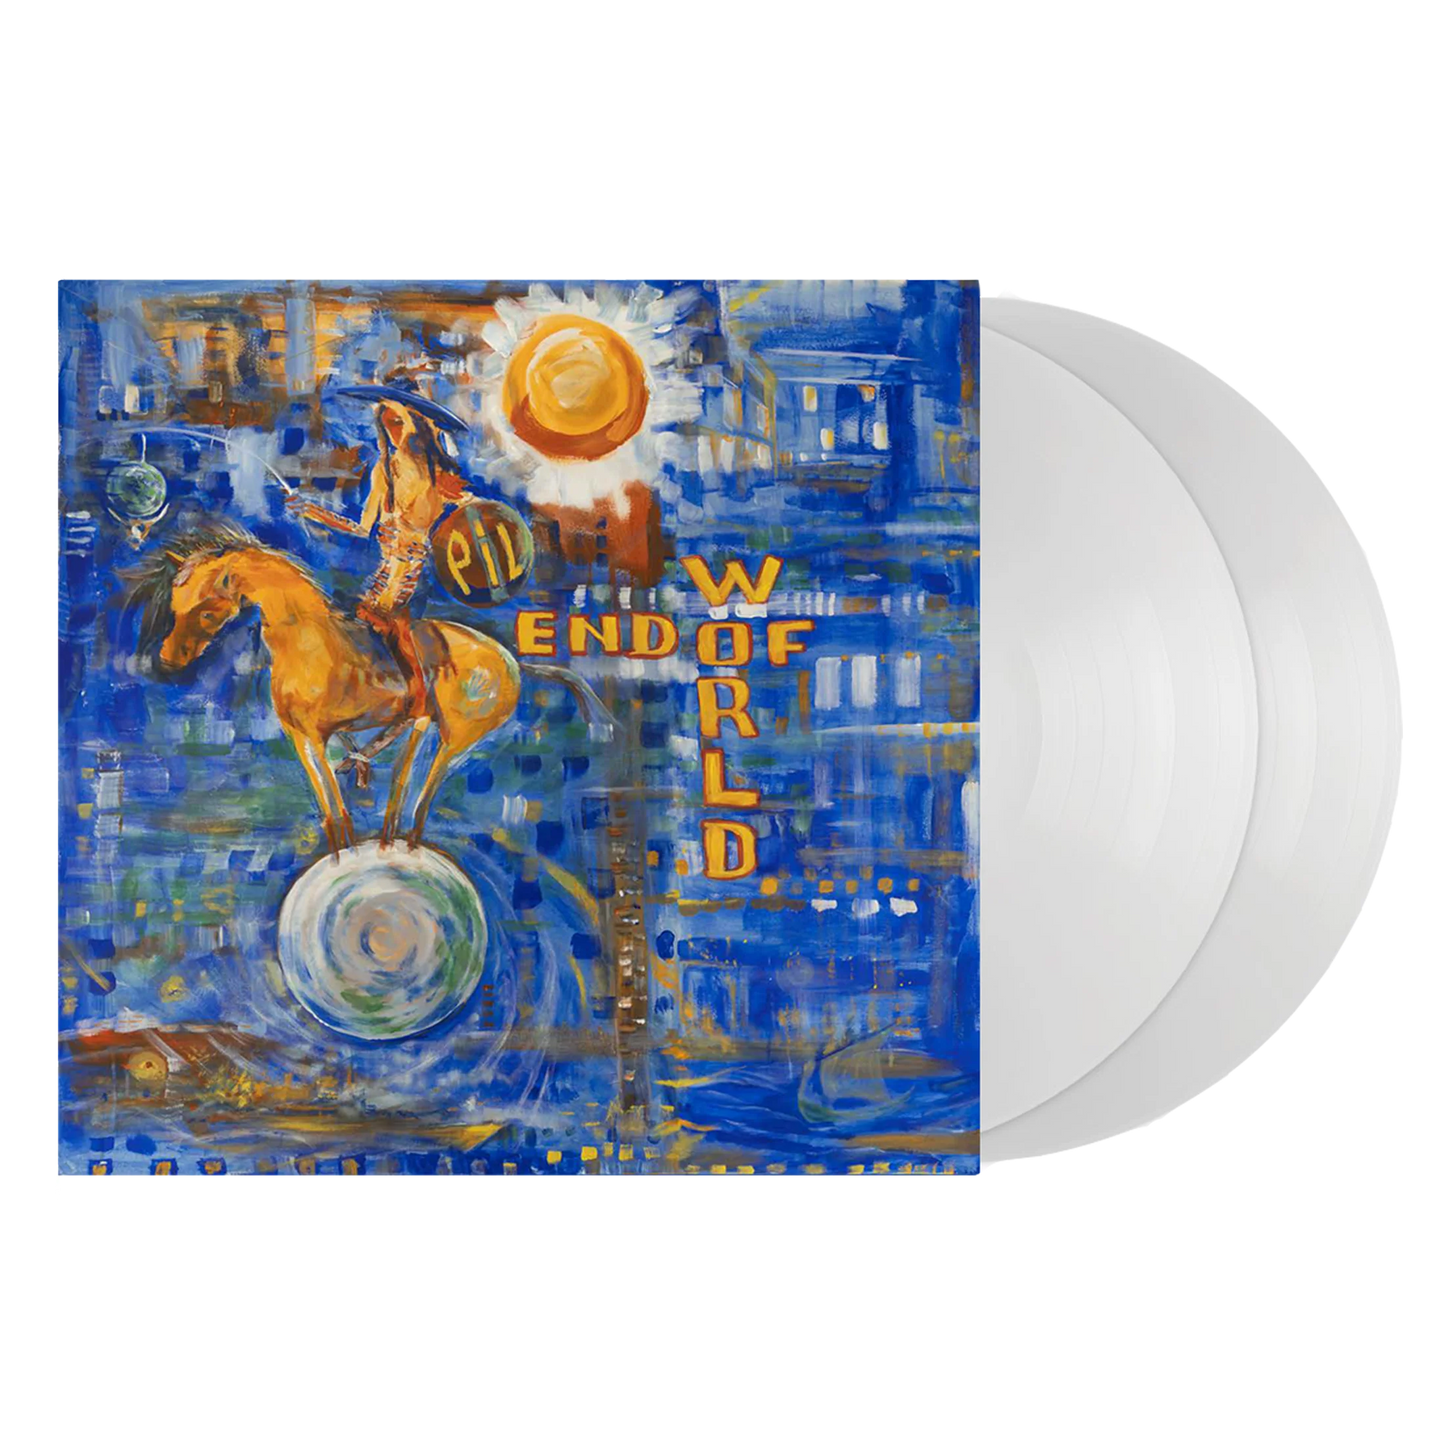 Public Image Limited (PIL) - End of World (Limited Edition on Double Solid White Vinyl)